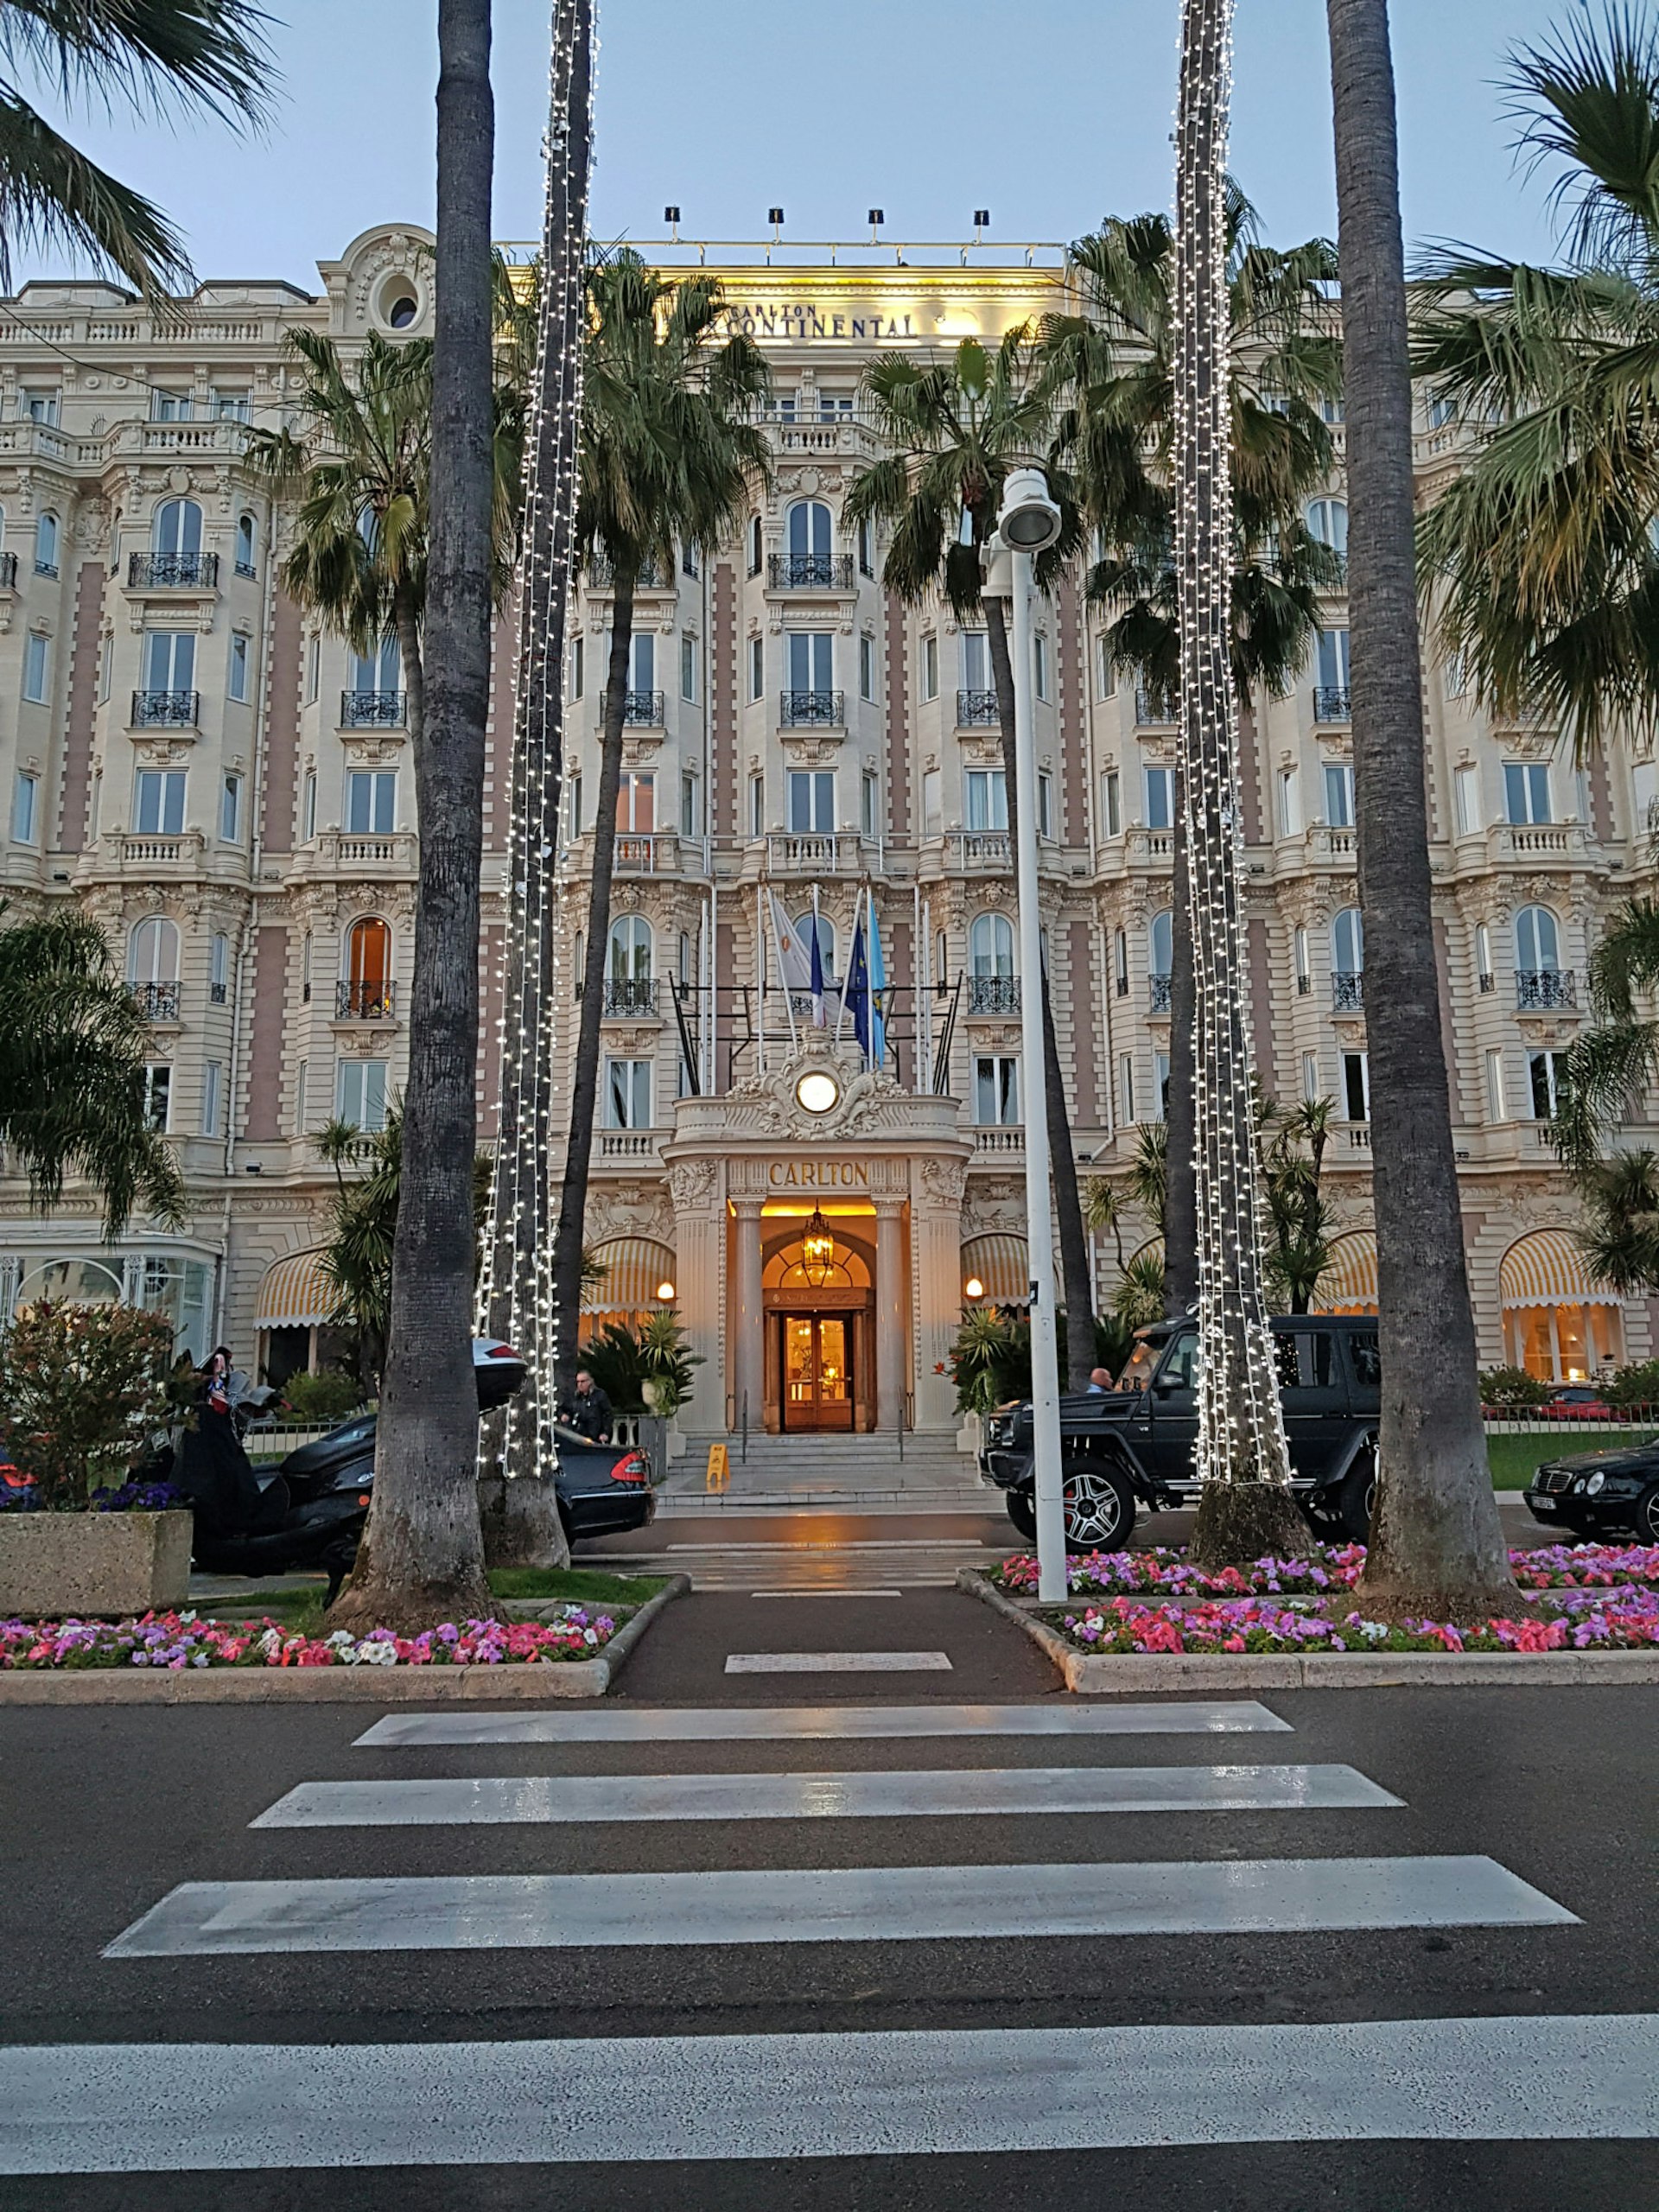 The palm tree lined facade of the InterContinental Carlton Hotel in Cannes, France